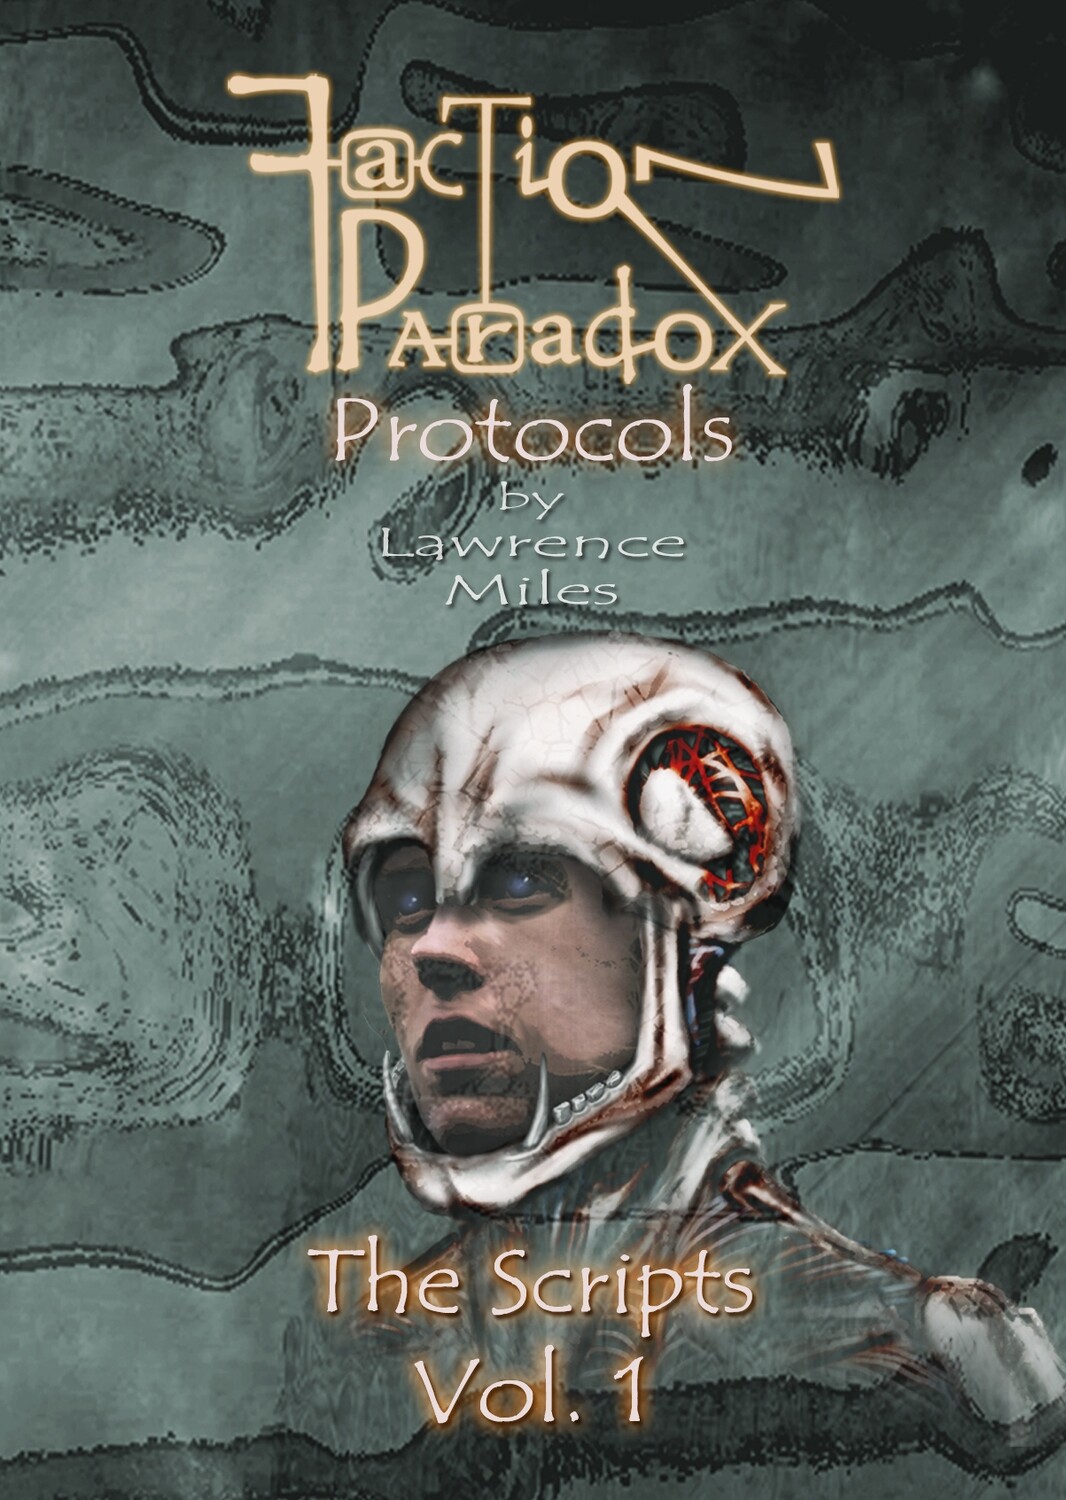 Faction Paradox Protocols: The Scripts Vol. 1 UK ONLY (BOOK)